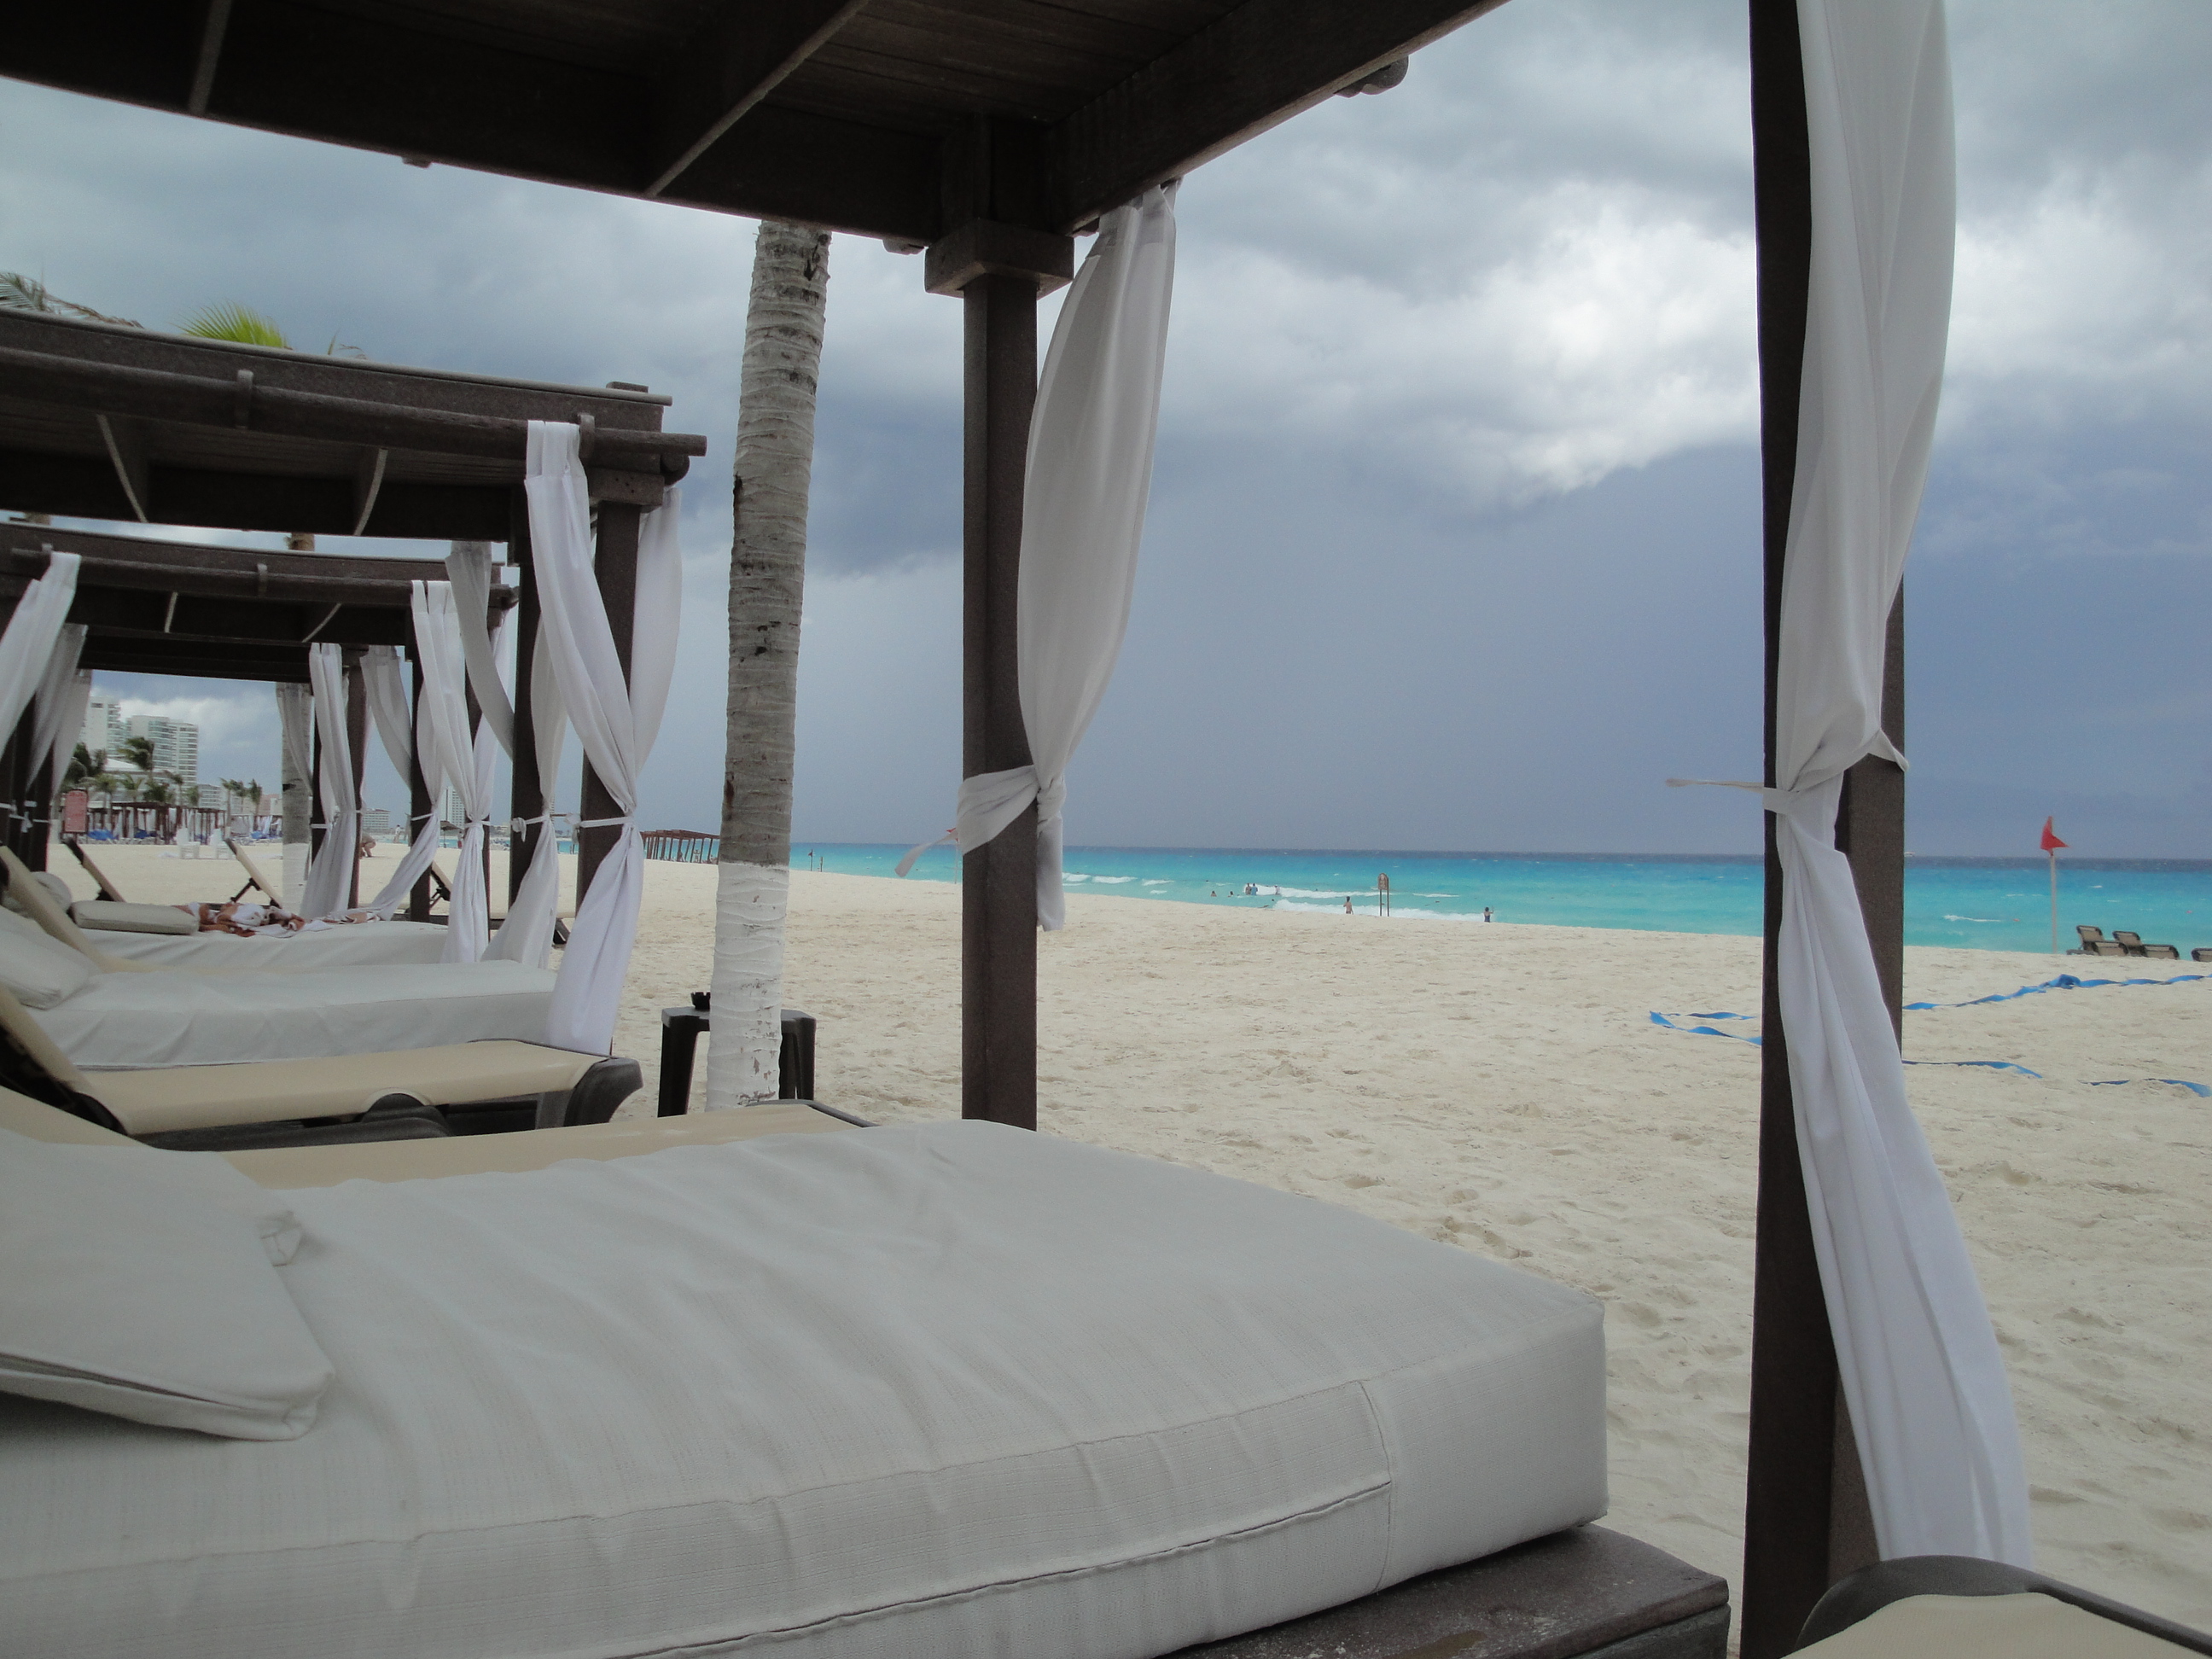 Daybeds on the beach at The Royal in Cancun Resort - Cancun, Mexico